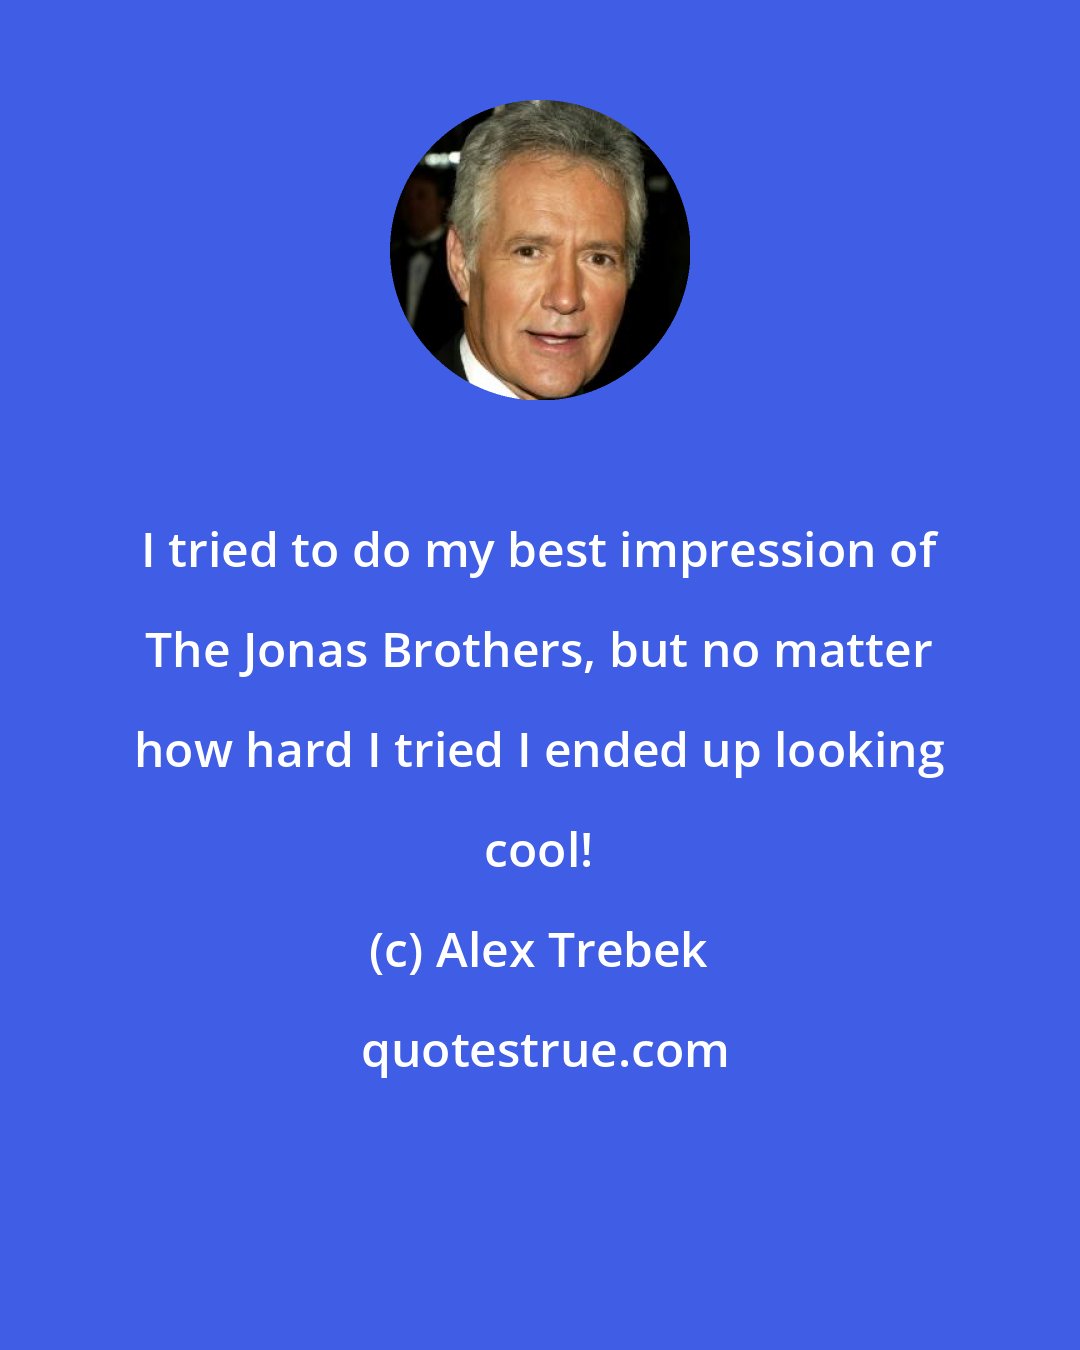 Alex Trebek: I tried to do my best impression of The Jonas Brothers, but no matter how hard I tried I ended up looking cool!